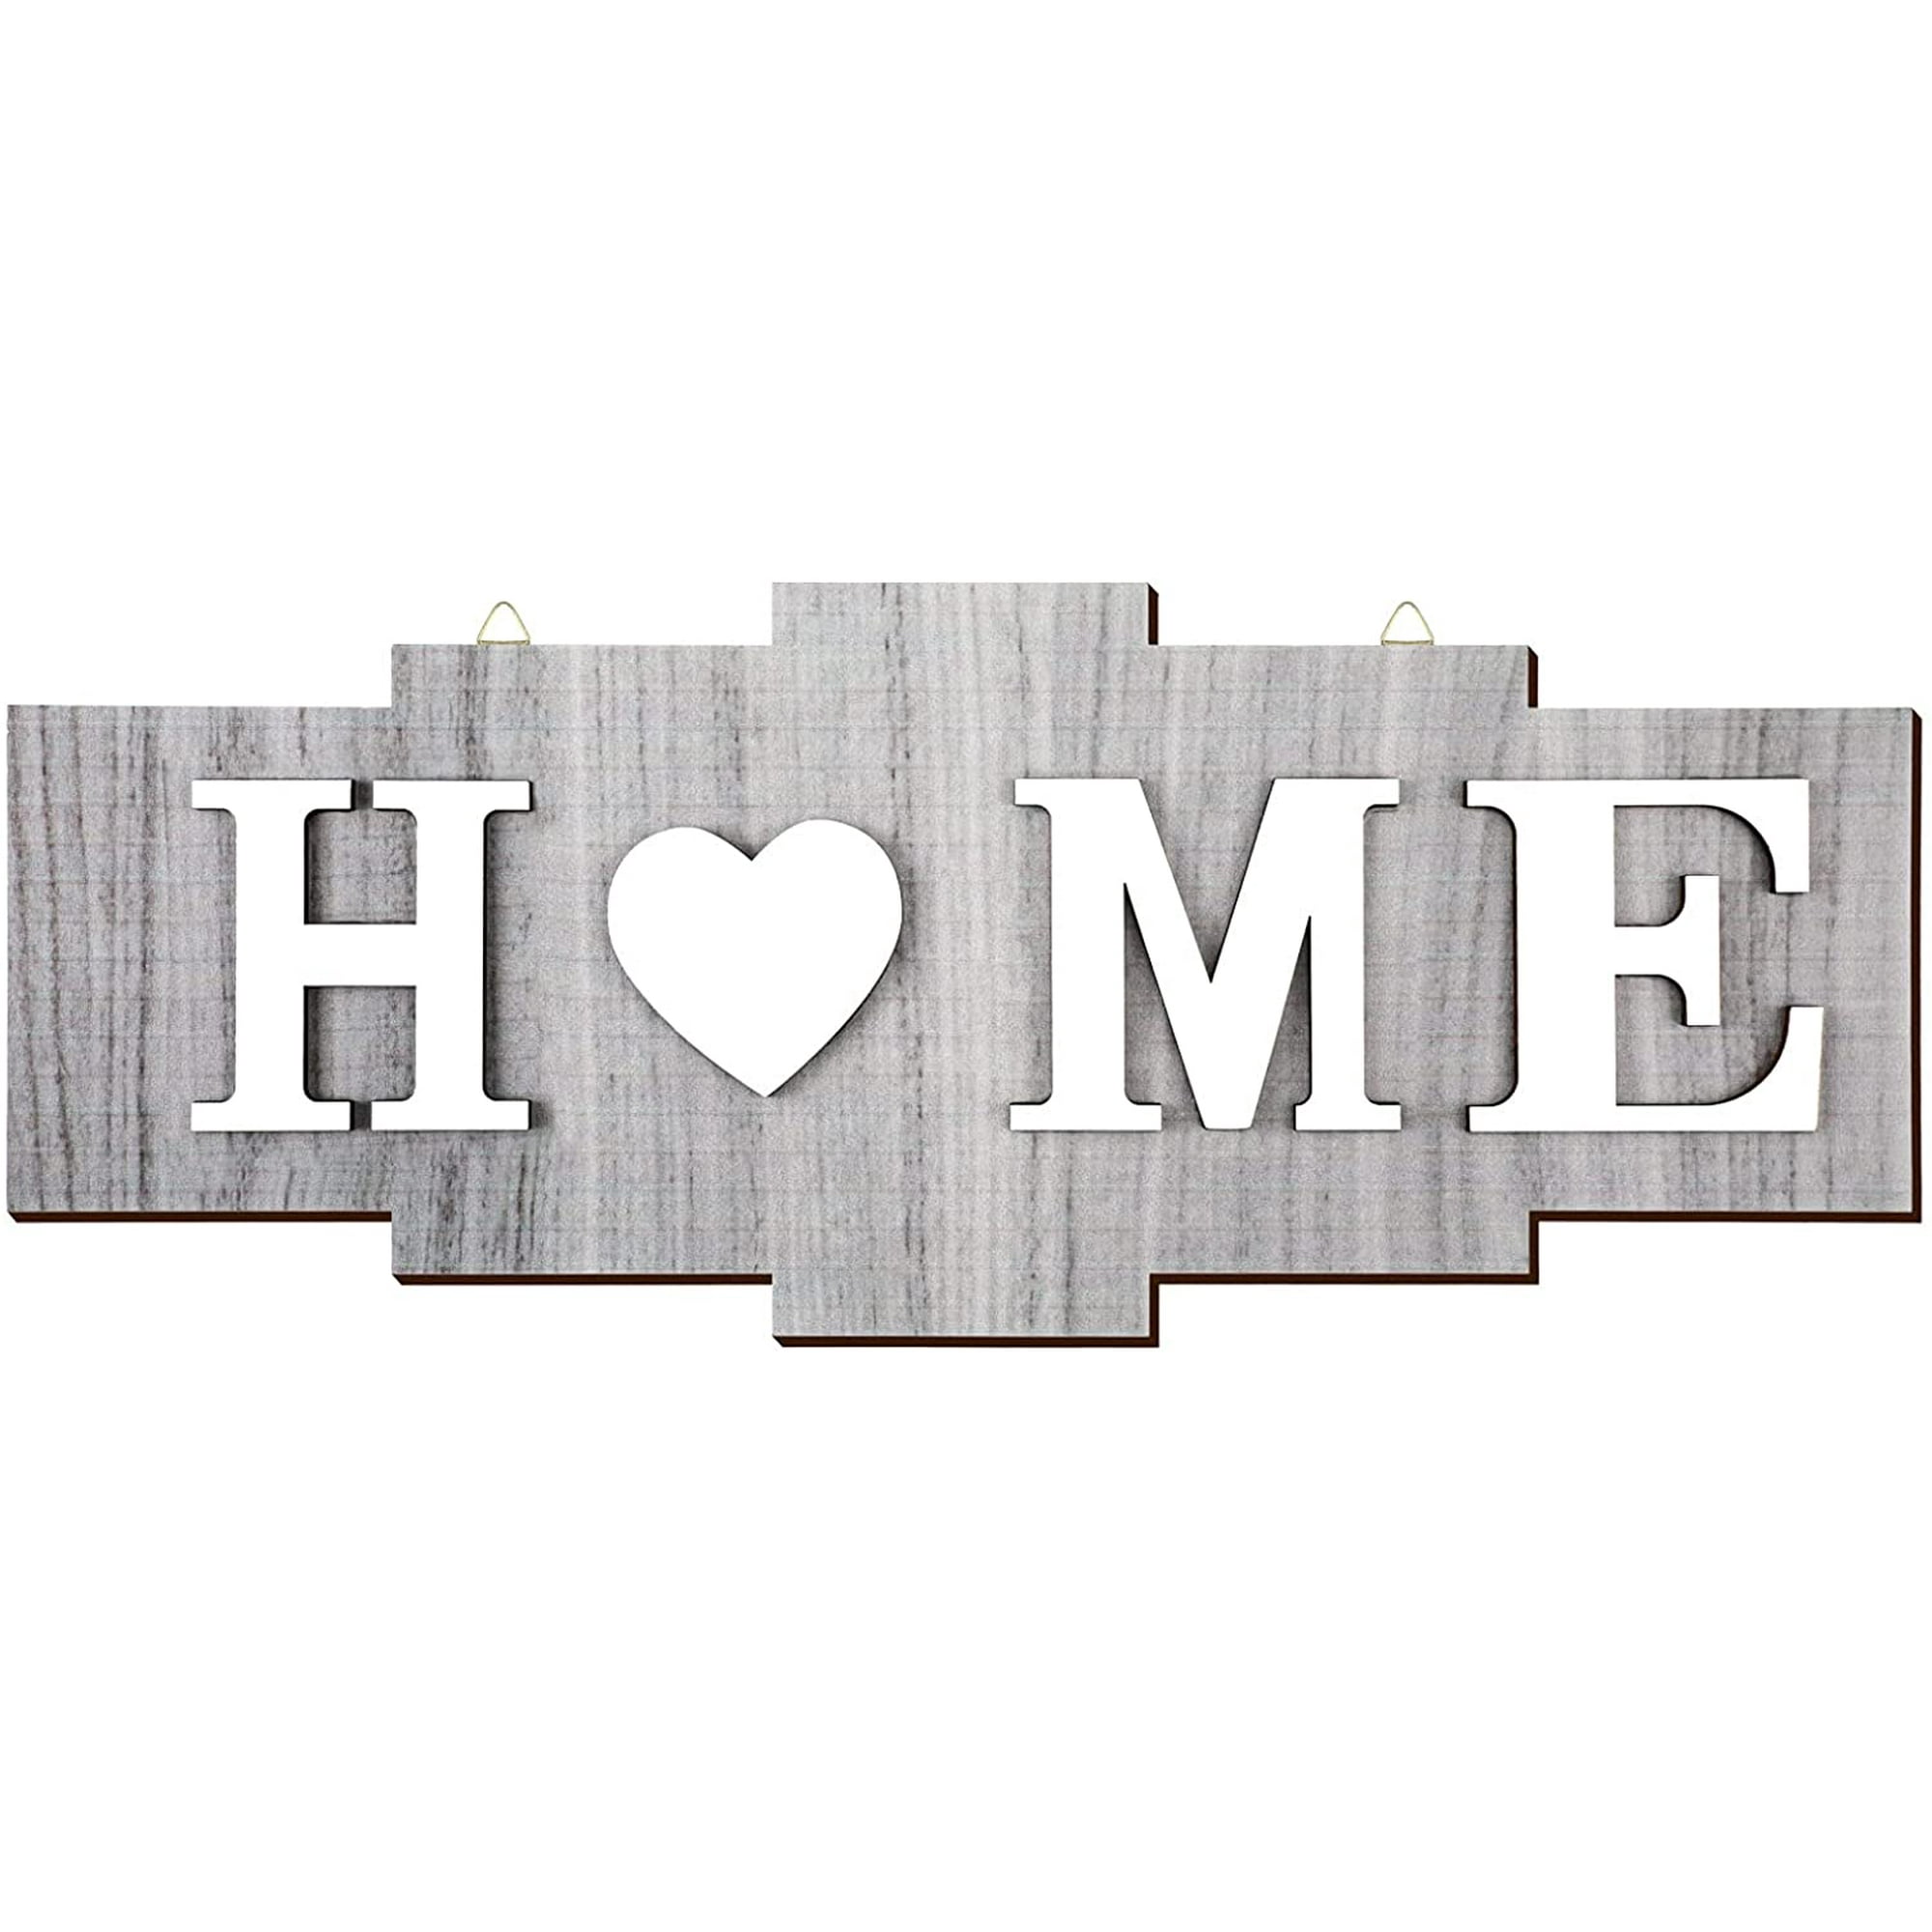 Sweet Farmhouse Wooden Wall Sign Decoration Wood Letters Ornament for Bedroom Classic Color Home Signs for Home Decor Living Room Home Heart Rustic Wall Decor Wood Home Sign Wedding Decor 